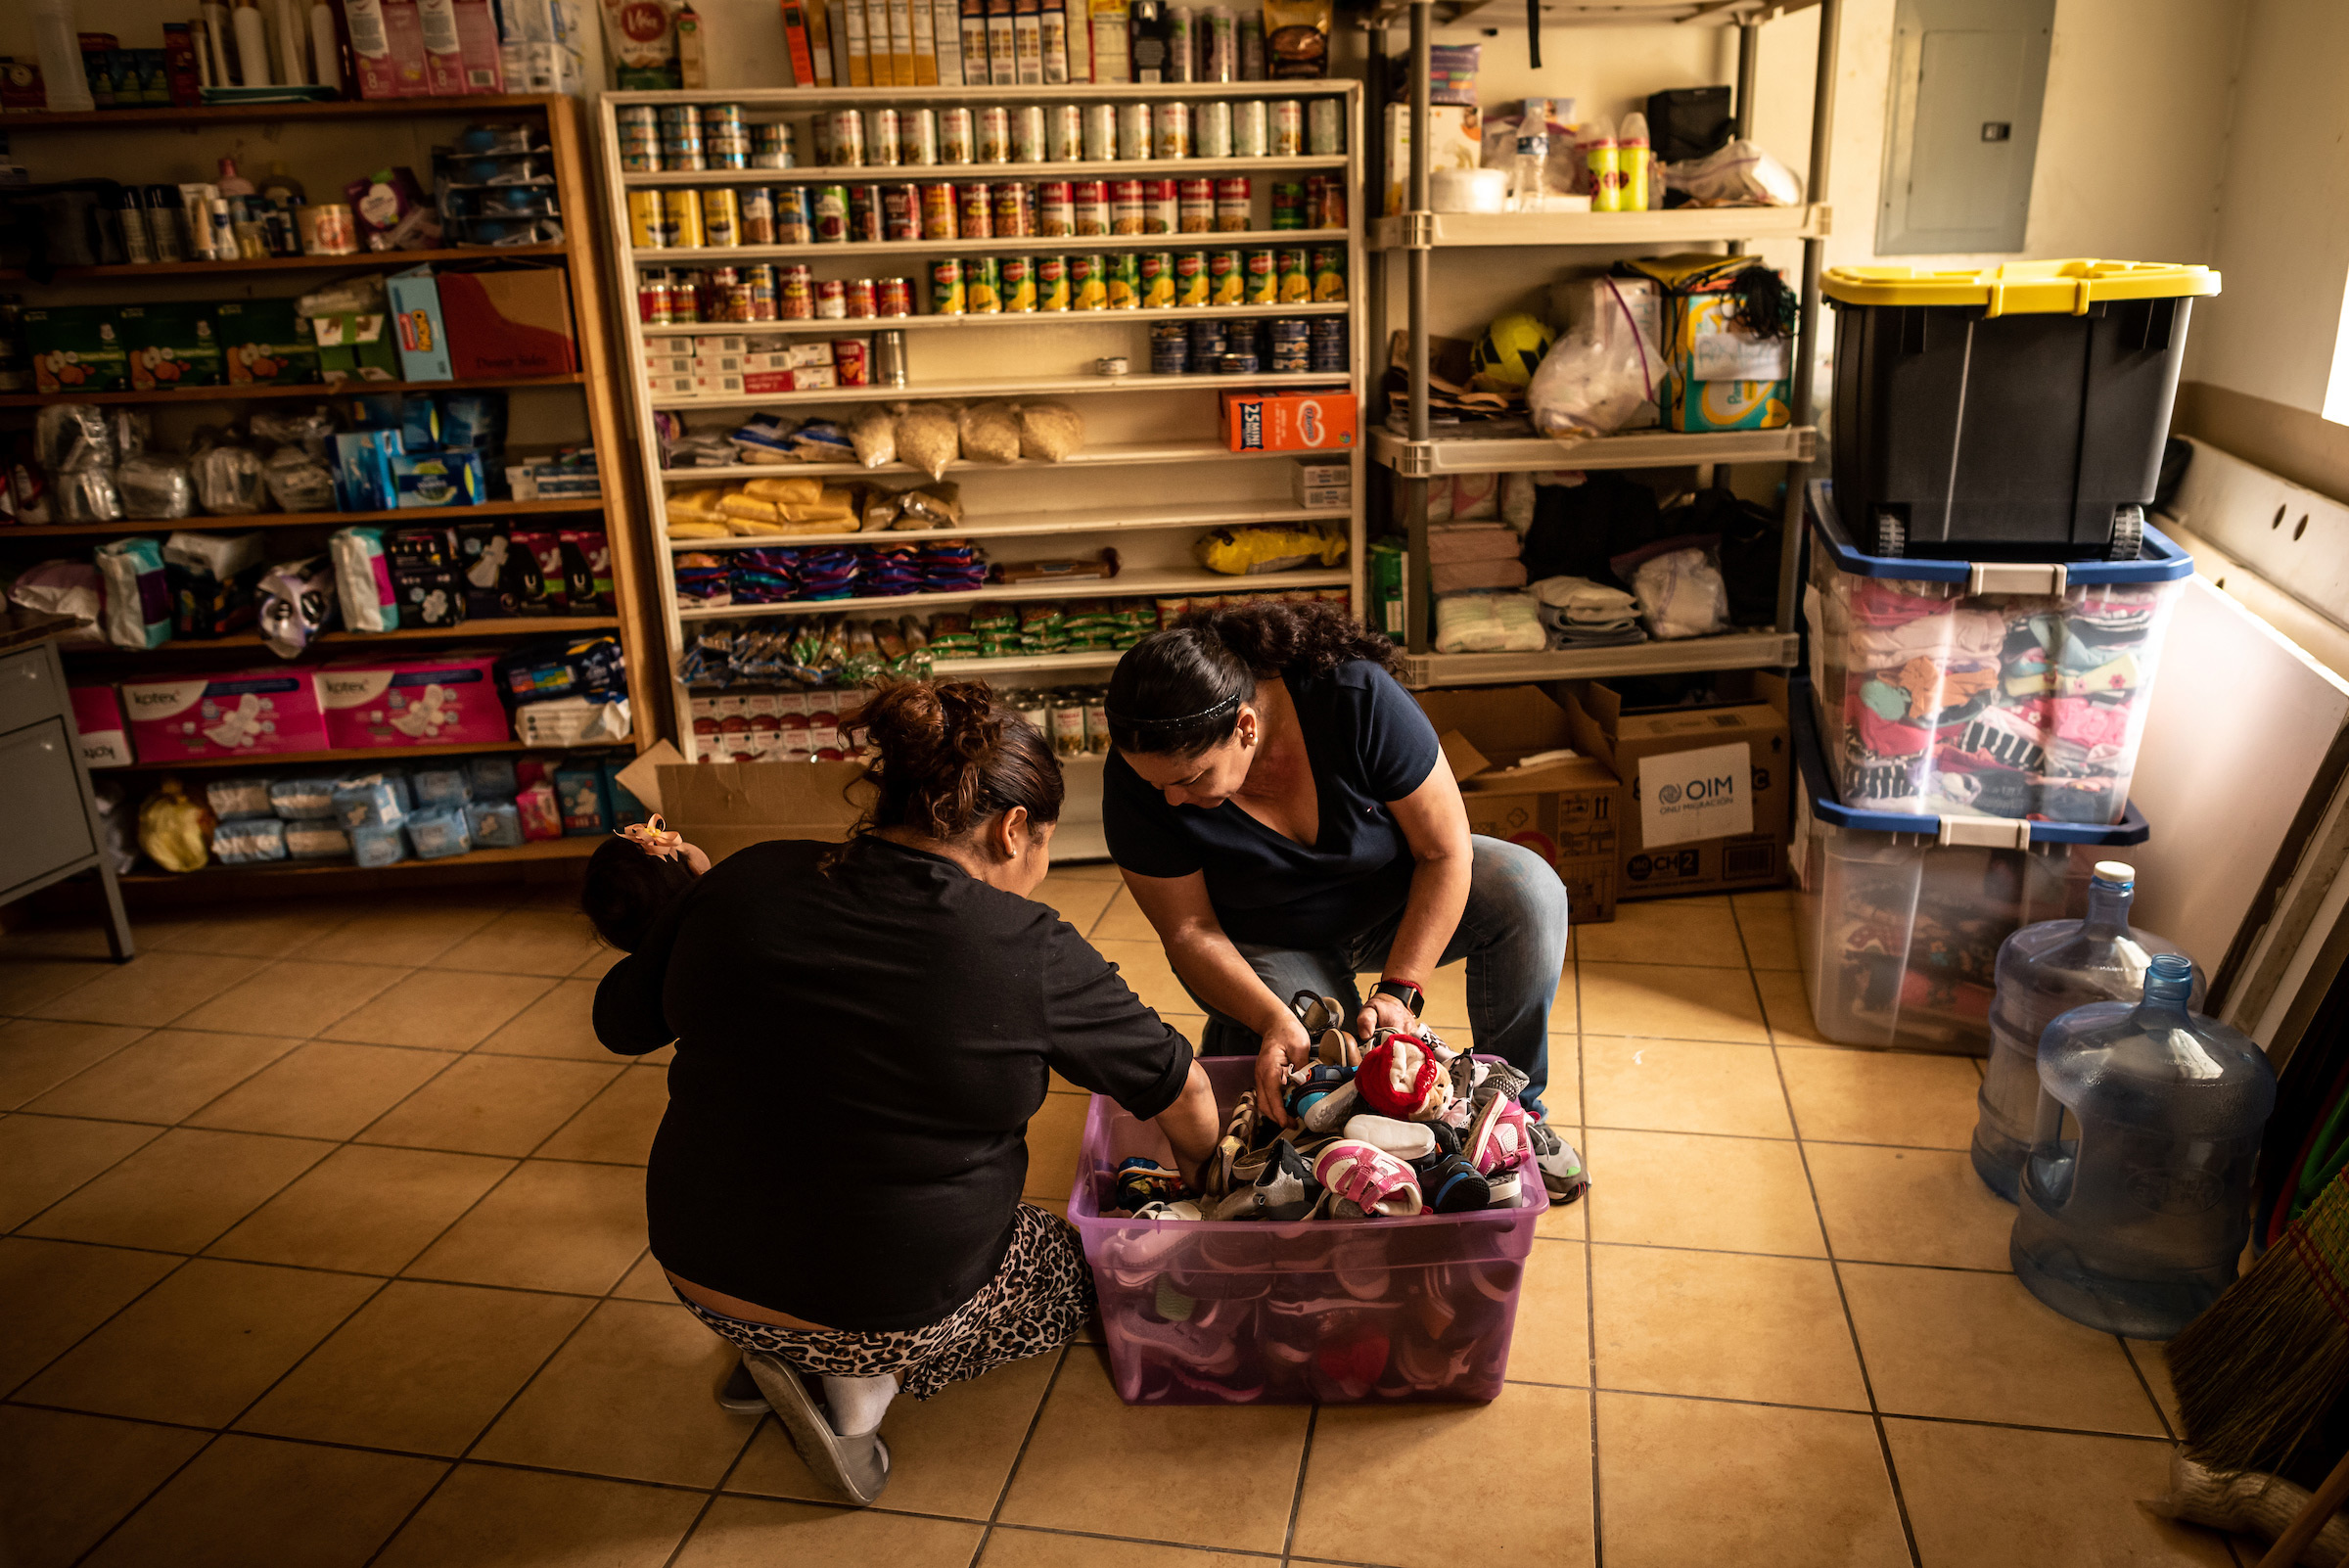 Shelter volunteer Marta Leticia Galarza Gandara, 50, right, helps Isa, 31, find shoes for her baby daughter in a box of donations. Isa is an asylum seeker from Honduras, and has been waiting at the border under MPP since September 2019.